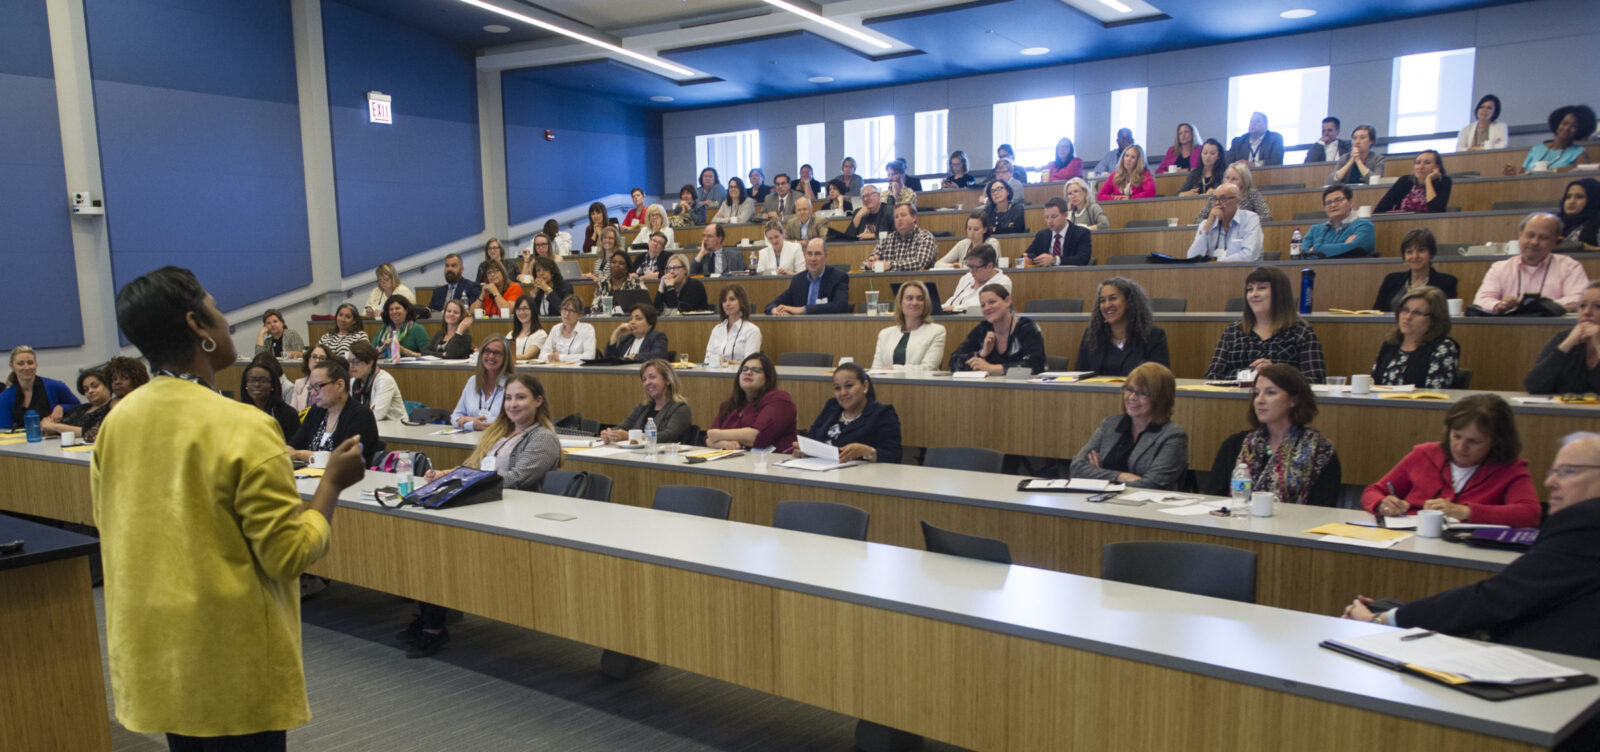 Axelson Center for Nonprofit Management at North Park University Hosts Annual Conference: “Focus on the Important”